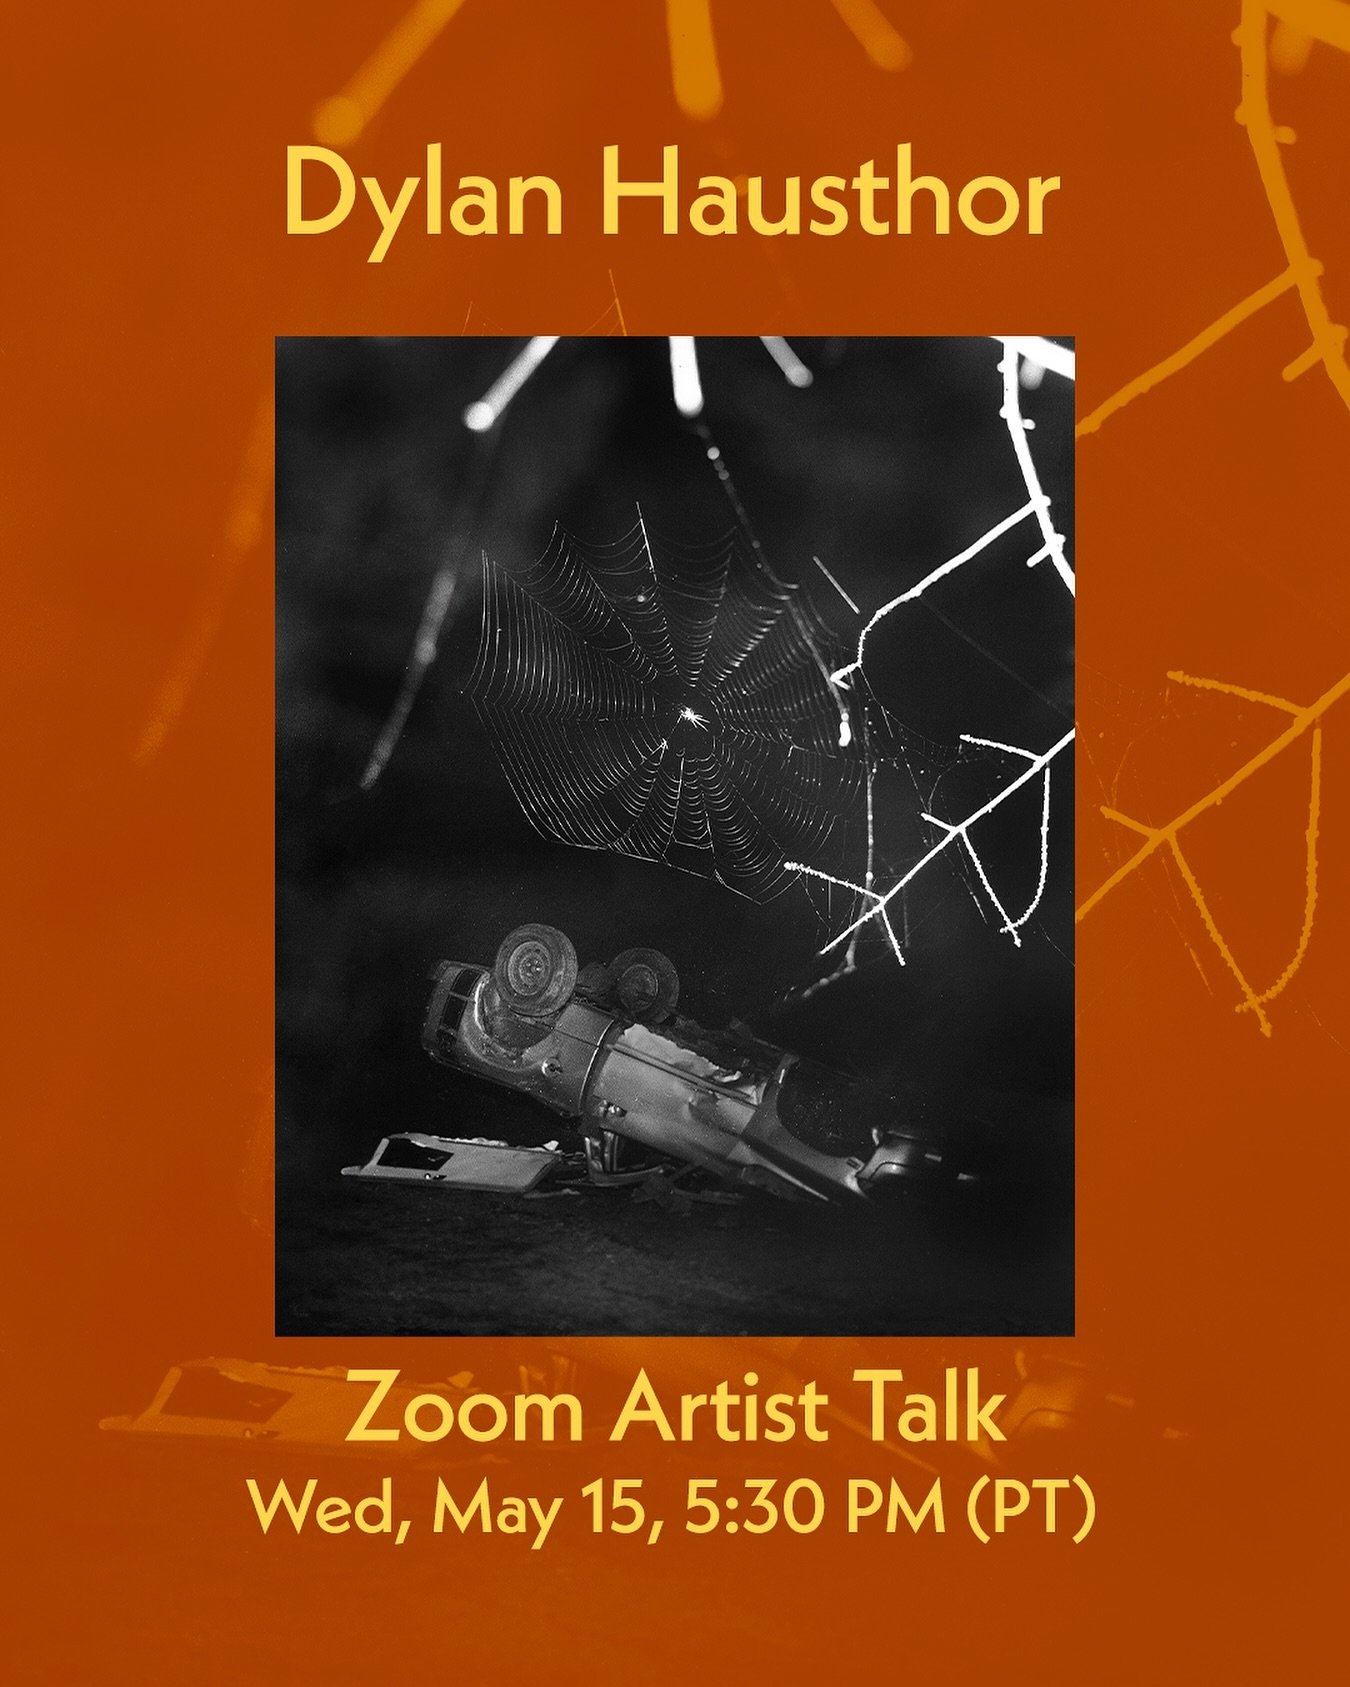 Mark your calendars for a Zoom Artist Talk with Dylan Hausthor on Wed, May 15 at 5:30 PM (PT). Hit the link in bio to sign up for this free event.

Do you have burning questions about Hausthor&rsquo;s work? Let us know by commenting below!

Their exh